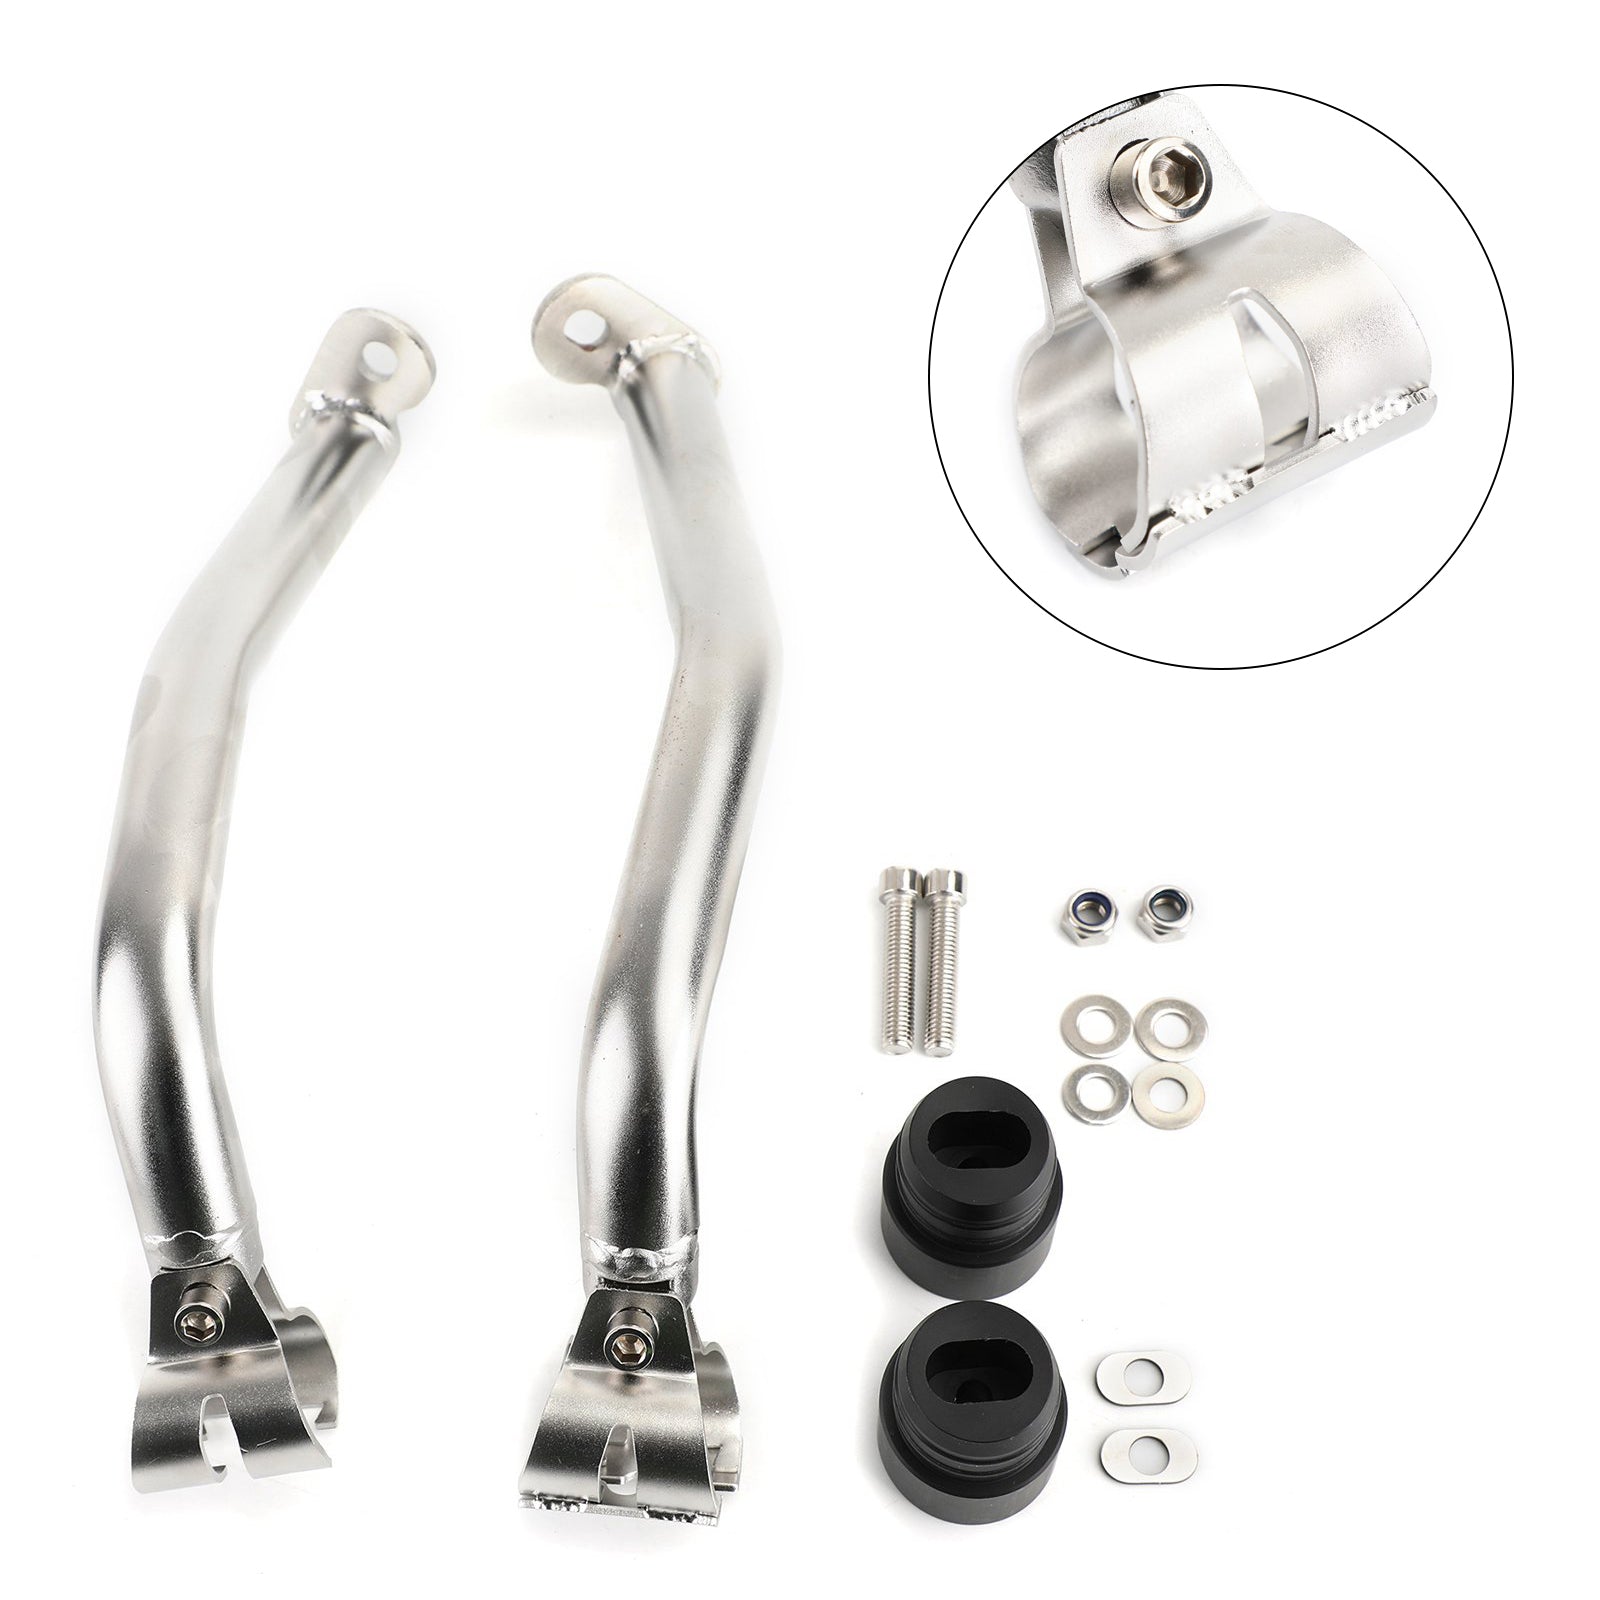 Cylinder Crash Bars Protection Fit for BMW R 1250 GS Adventure 2018 - 2021 Generic